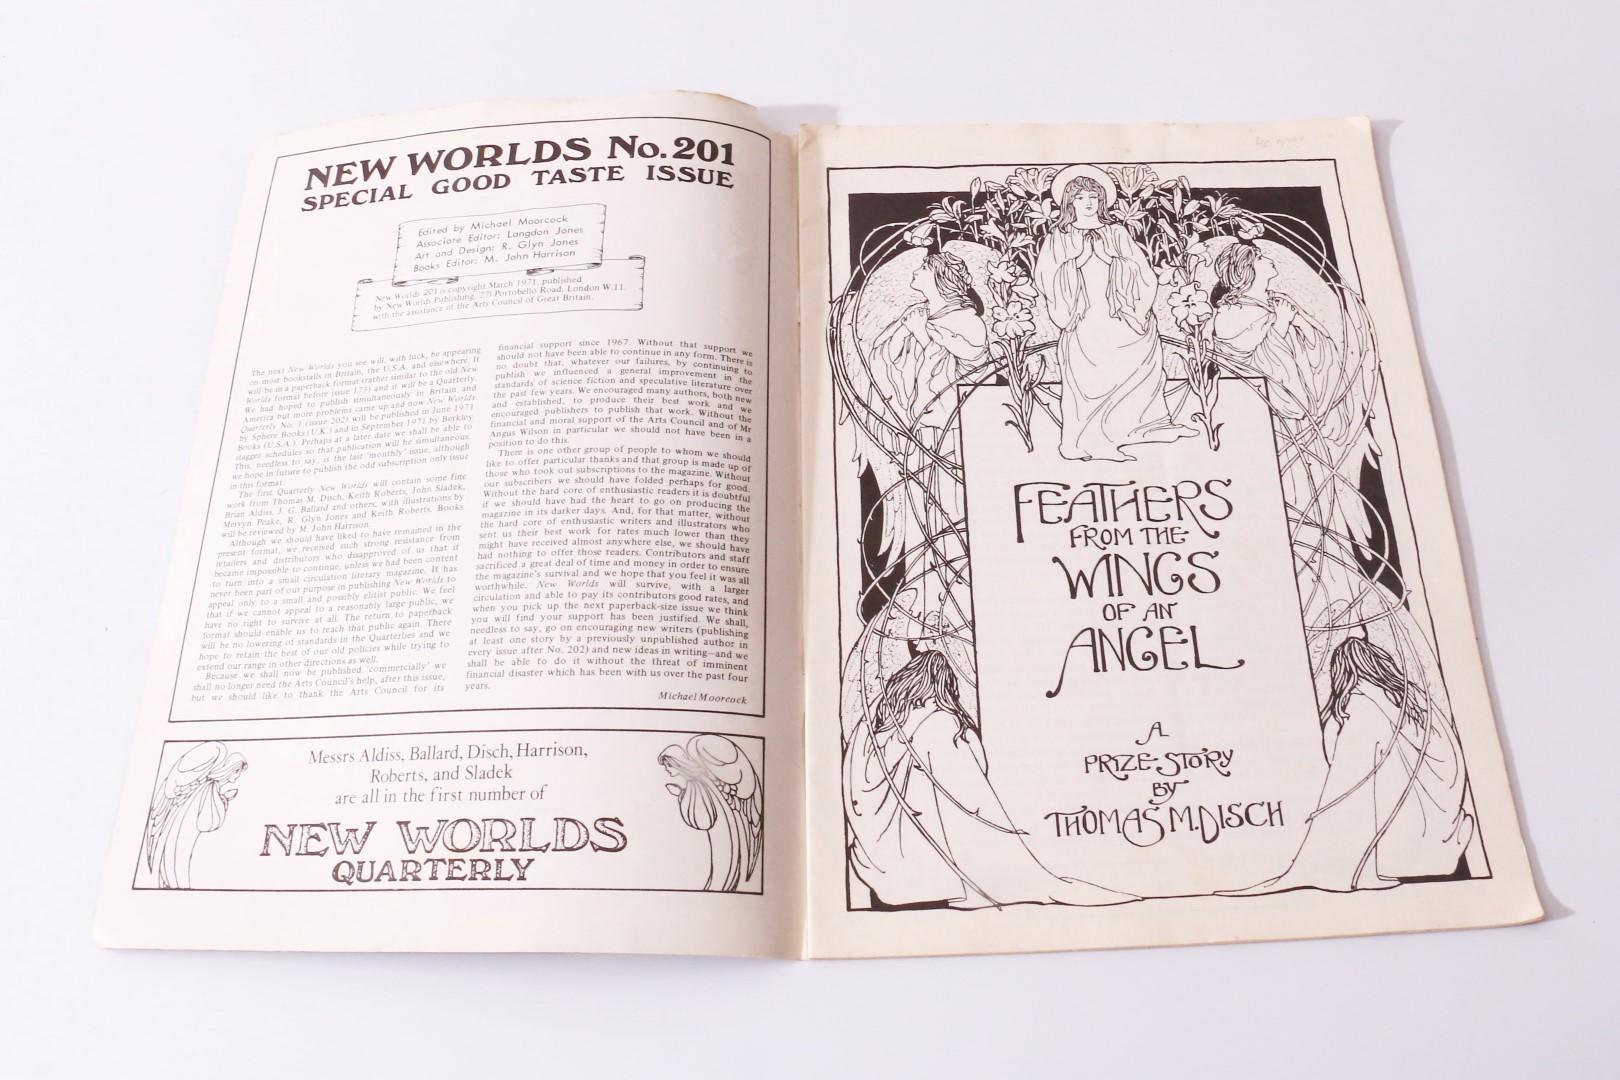 Michael Moorcock [ed.] - New Worlds No. 201 - Special Good Taste Issue - New World Publishing, 1971, First Edition.